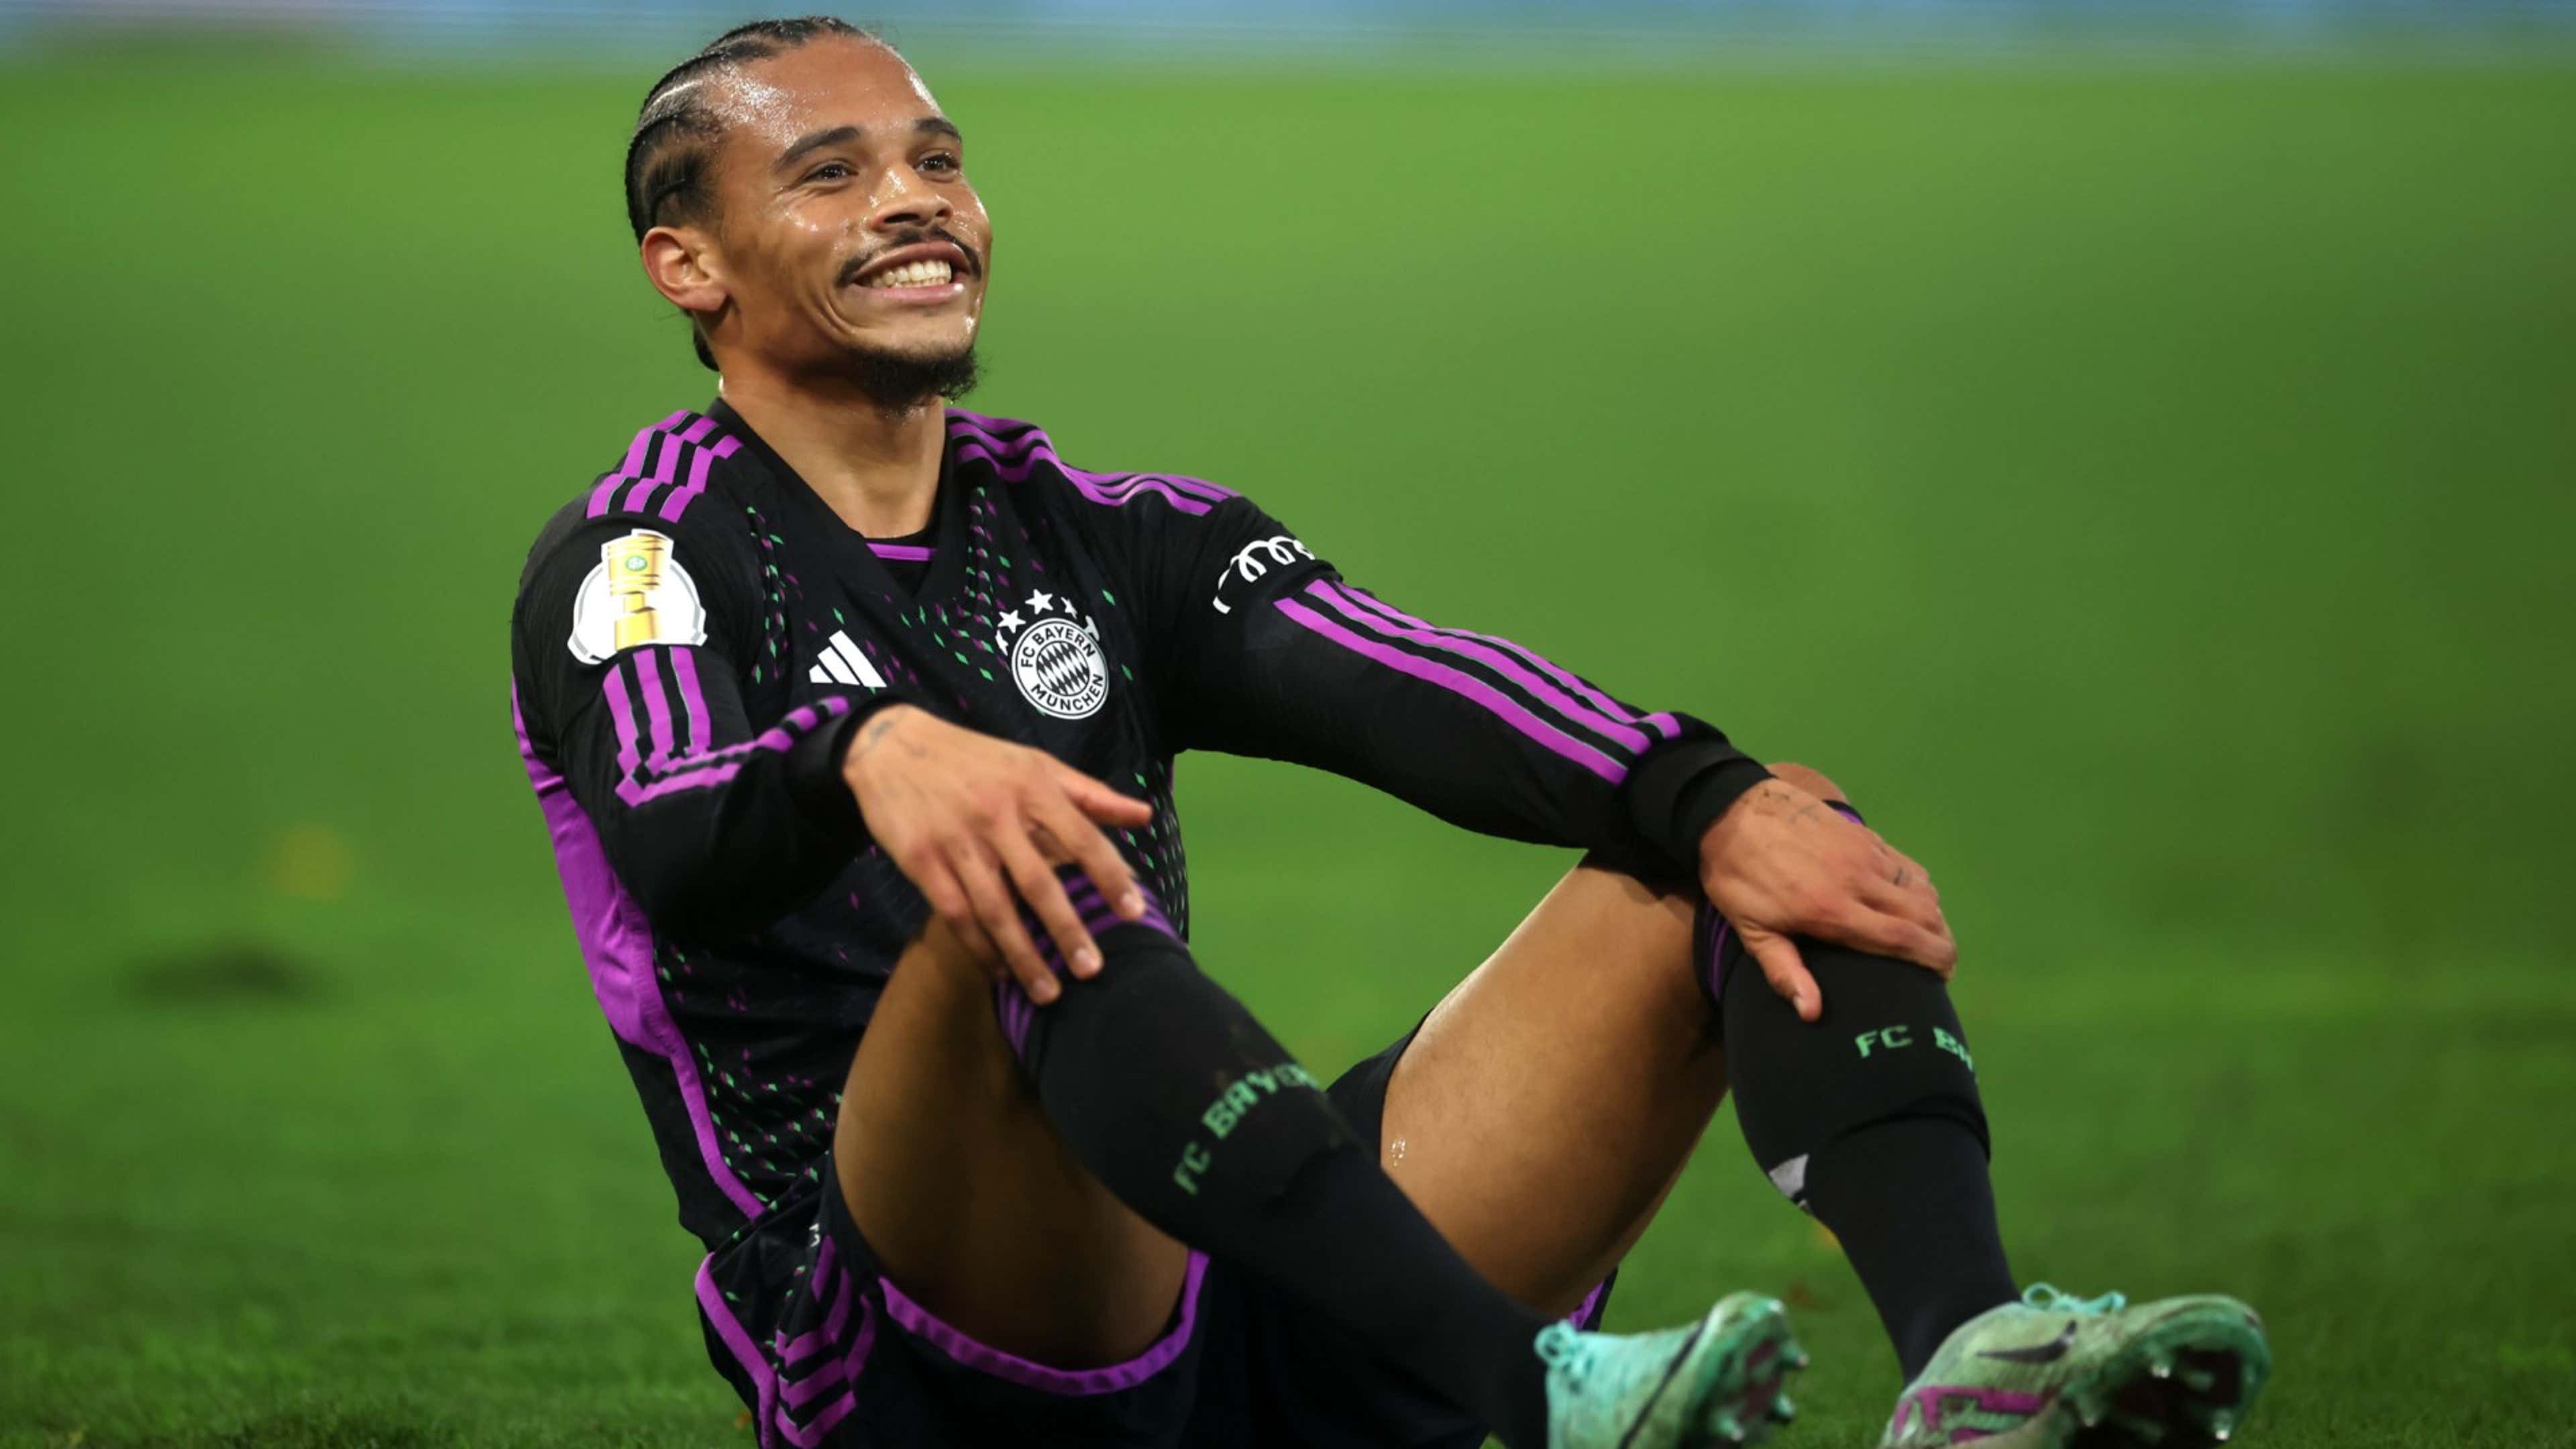 Leroy Sane set for shock return? Man City want winger to return from Bayern but face competition from Liverpool | Goal.com India